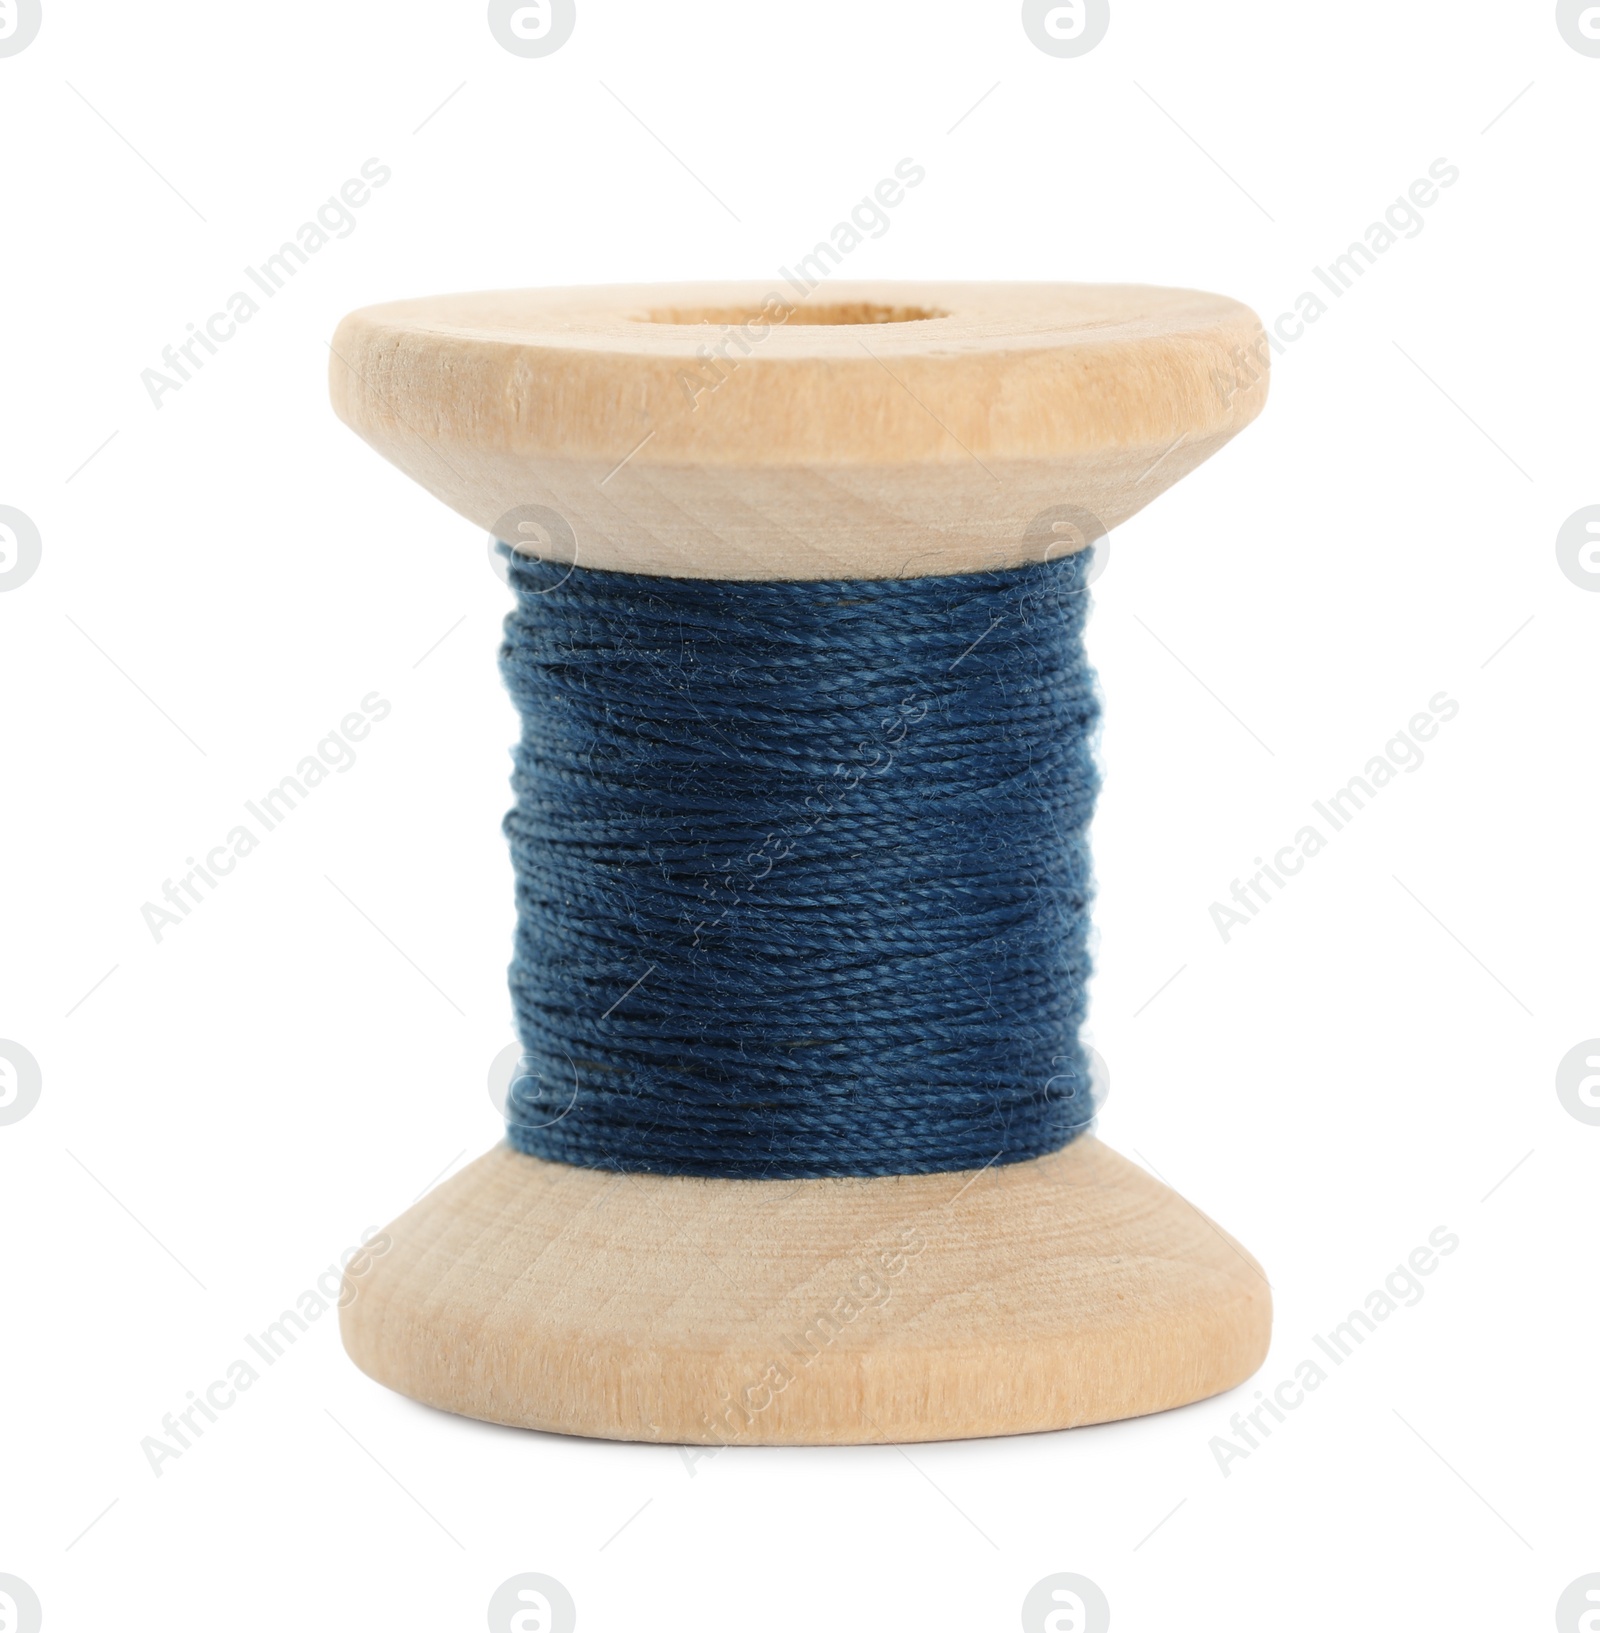 Photo of Wooden spool of dark blue sewing thread isolated on white